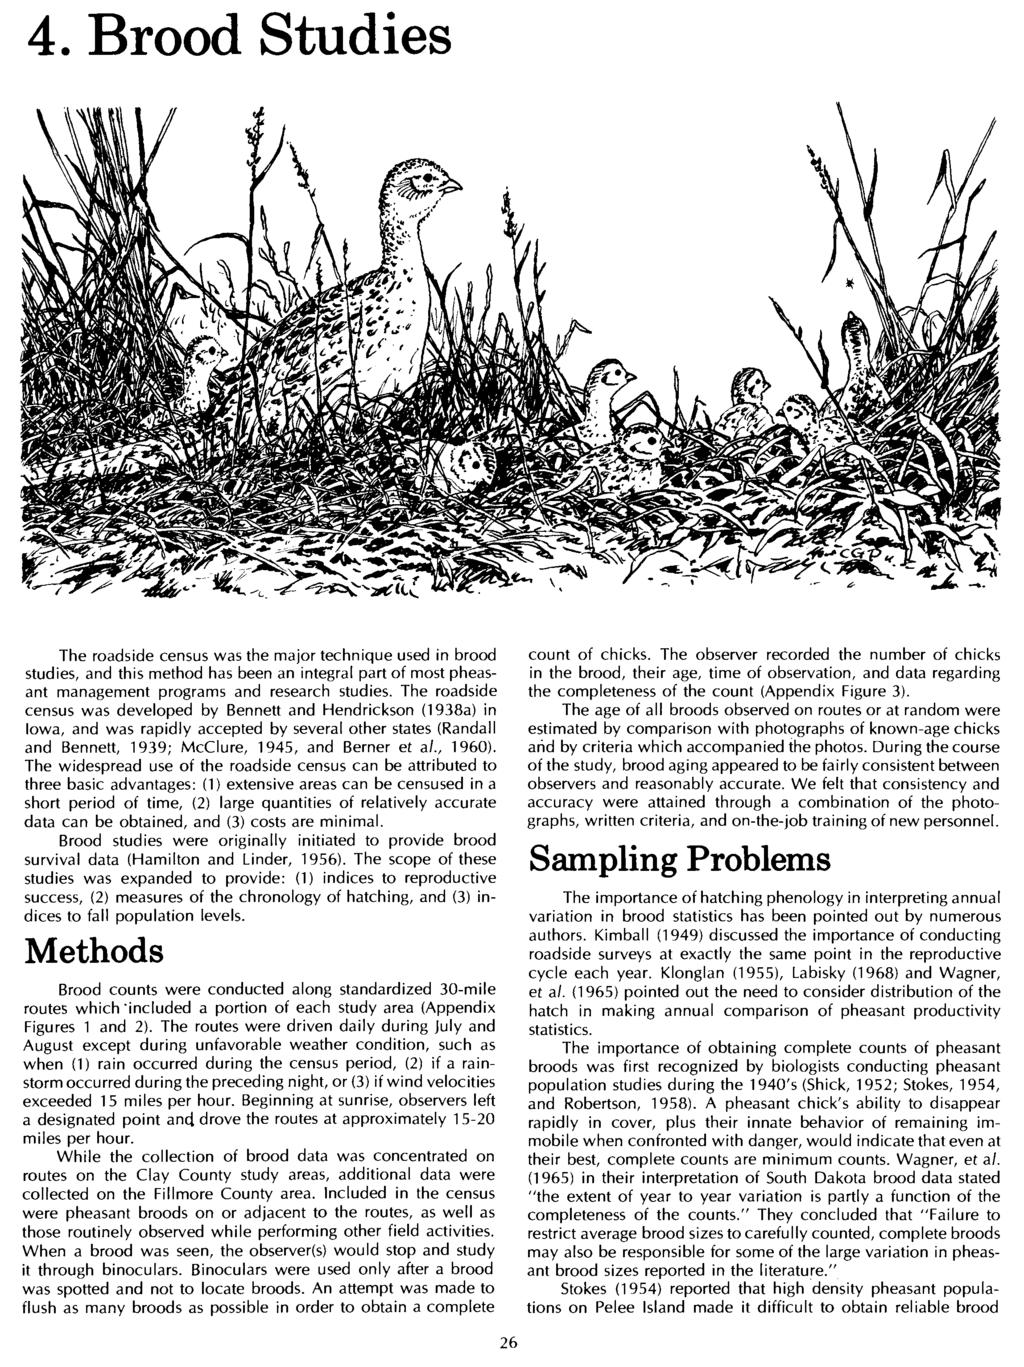 4. Brood Studies The roadside census was the major technique used in brood studies, and this method has been an integral part of most pheasant management programs and research studies.